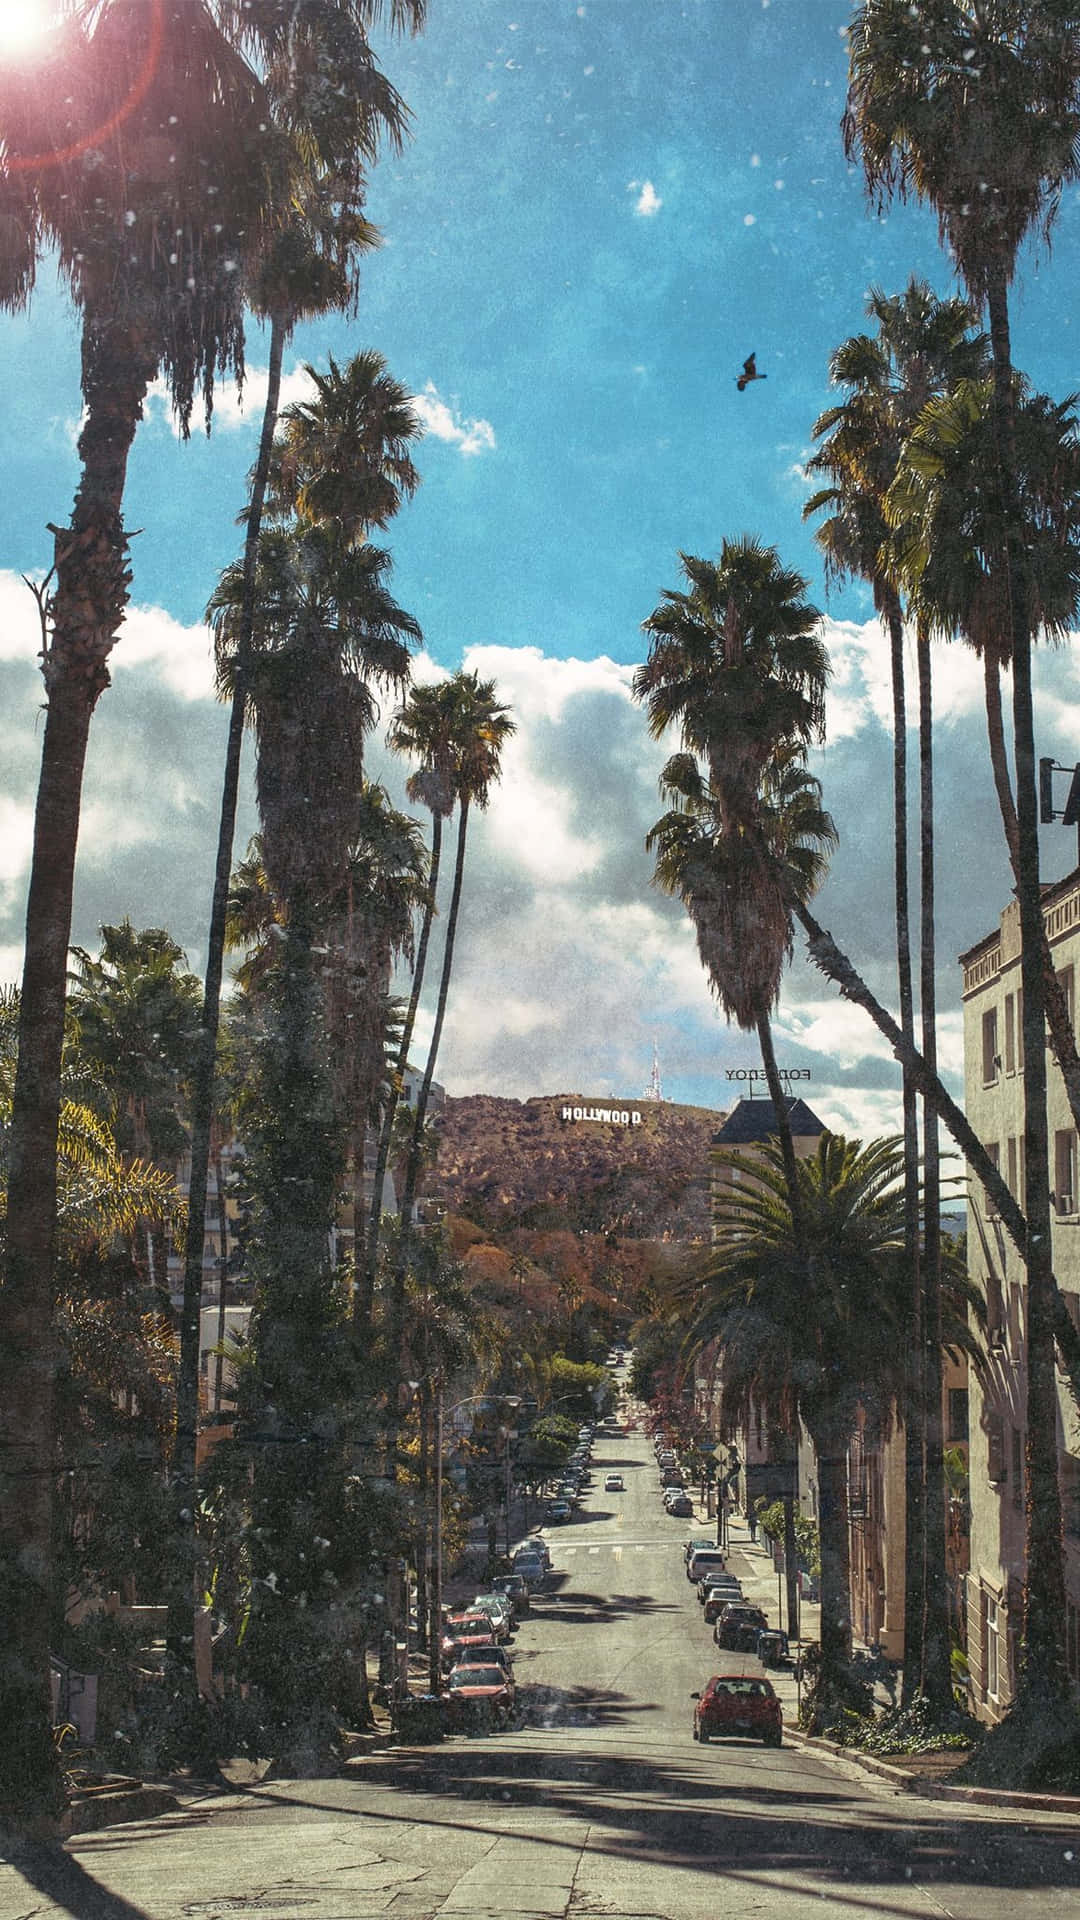 Enjoy the sunshine with a California iPhone Wallpaper